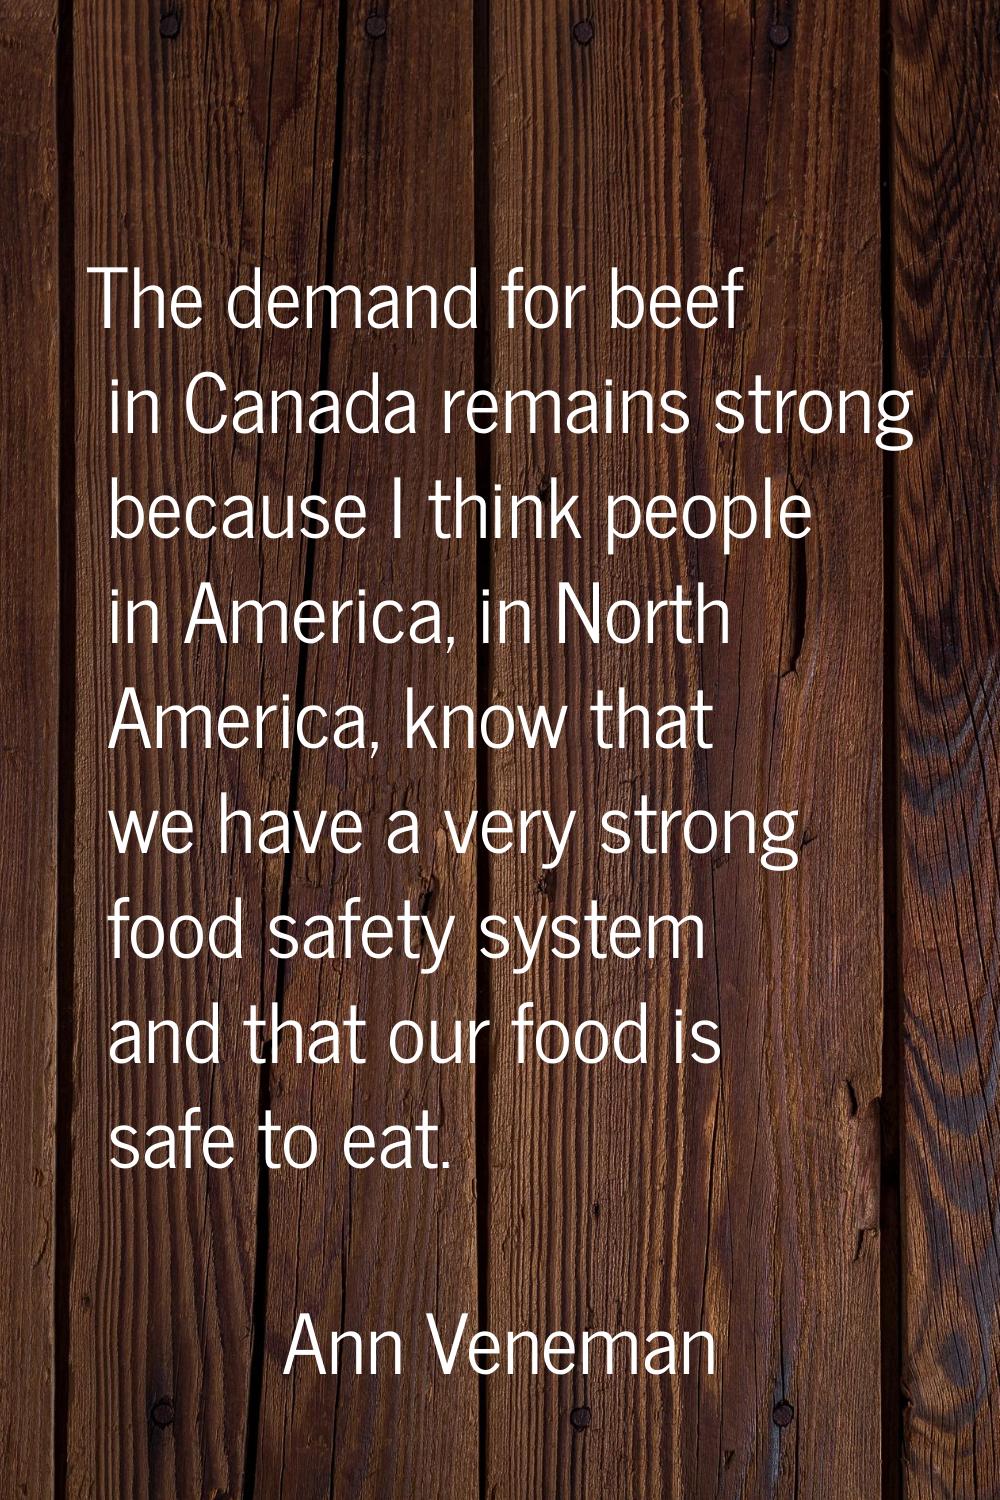 The demand for beef in Canada remains strong because I think people in America, in North America, k